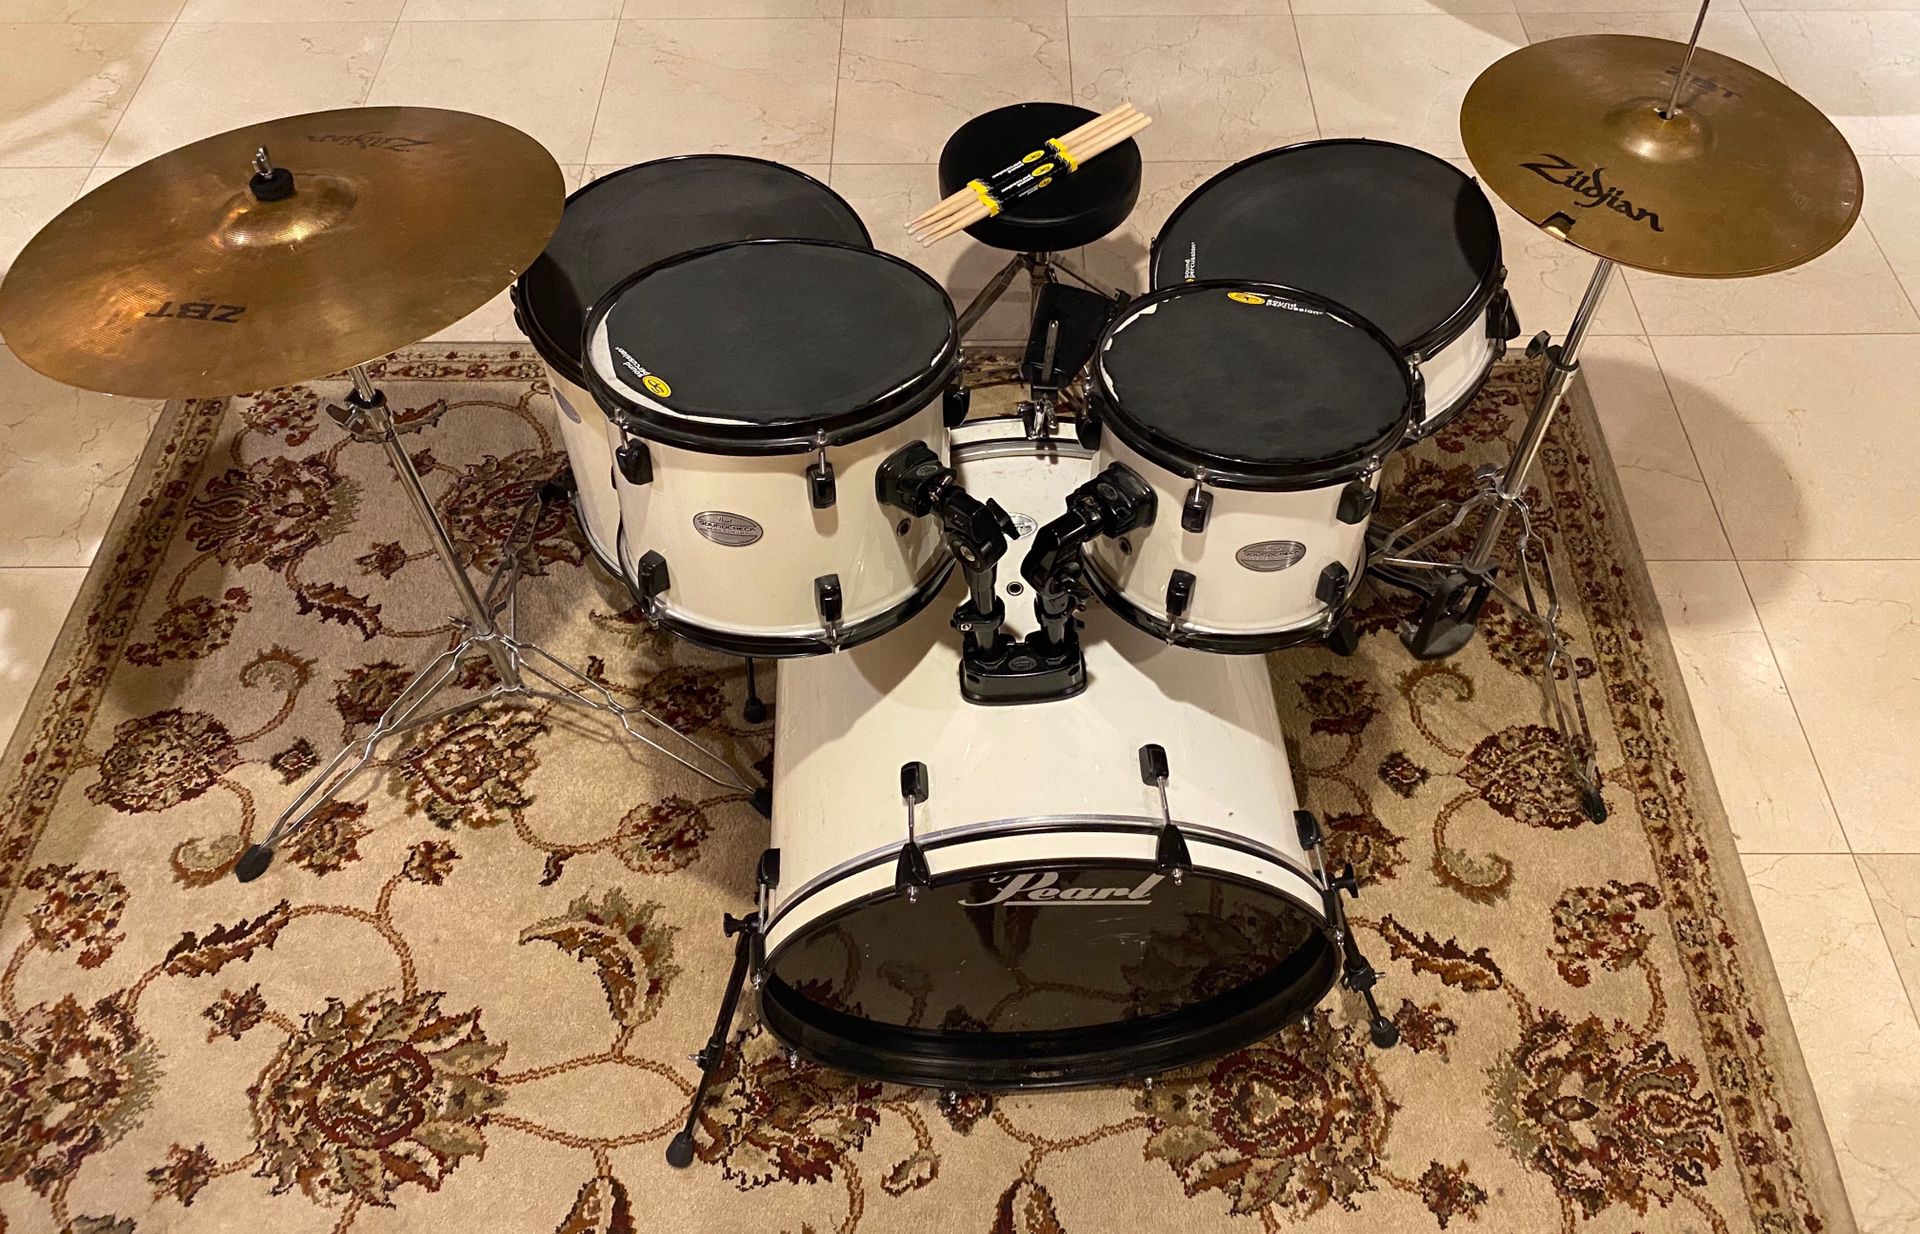 Used pearl drum set with accessories (open to negotiation)